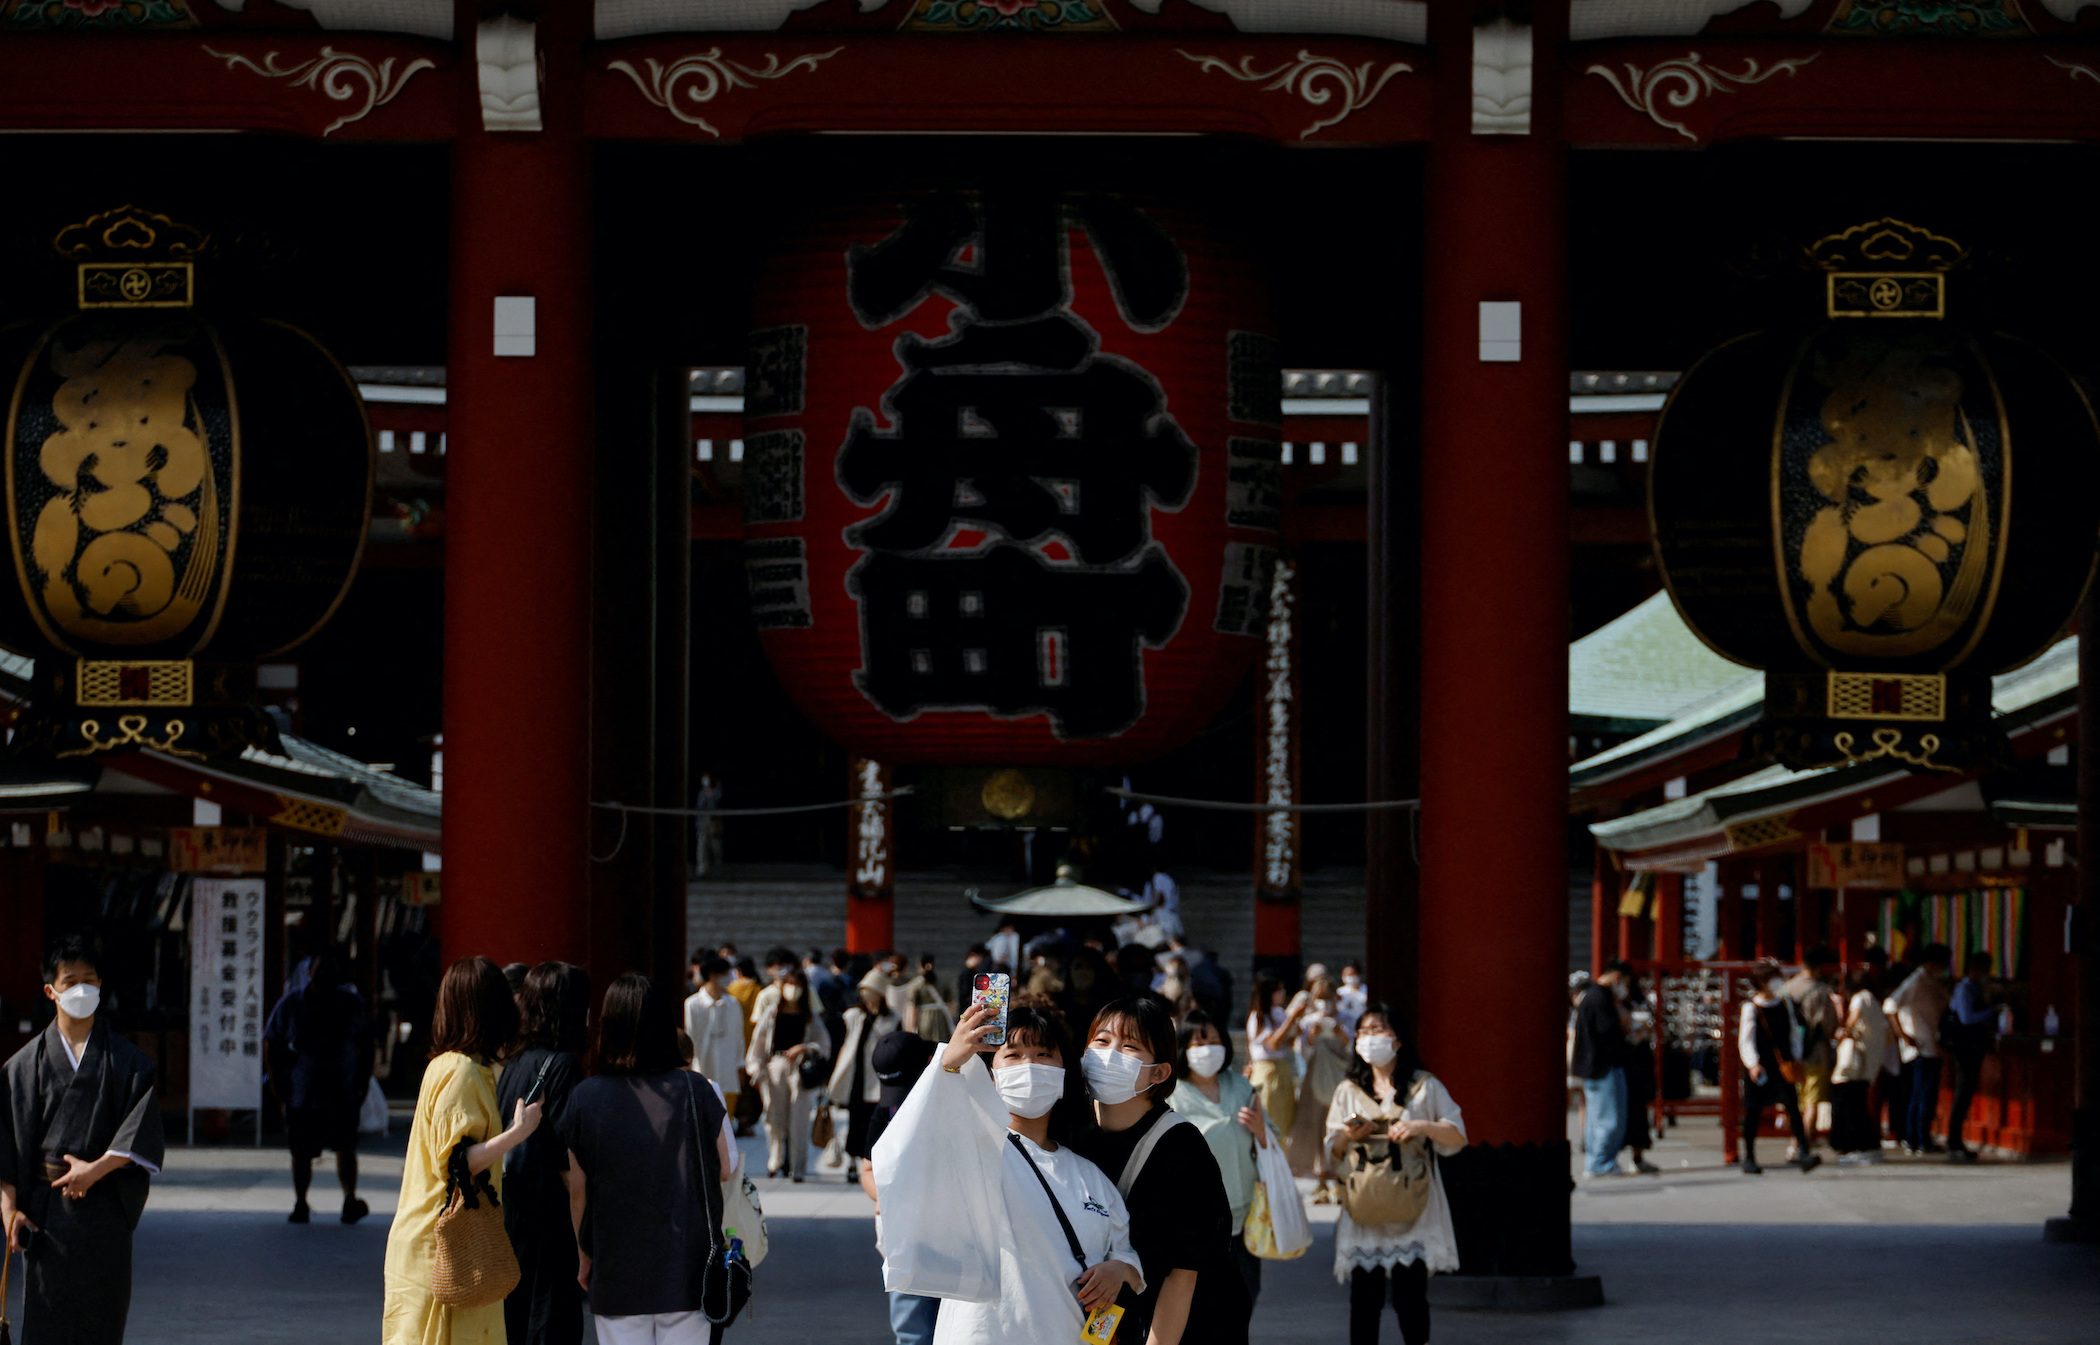 Foreign visitors in Japan surge after tourism reopening